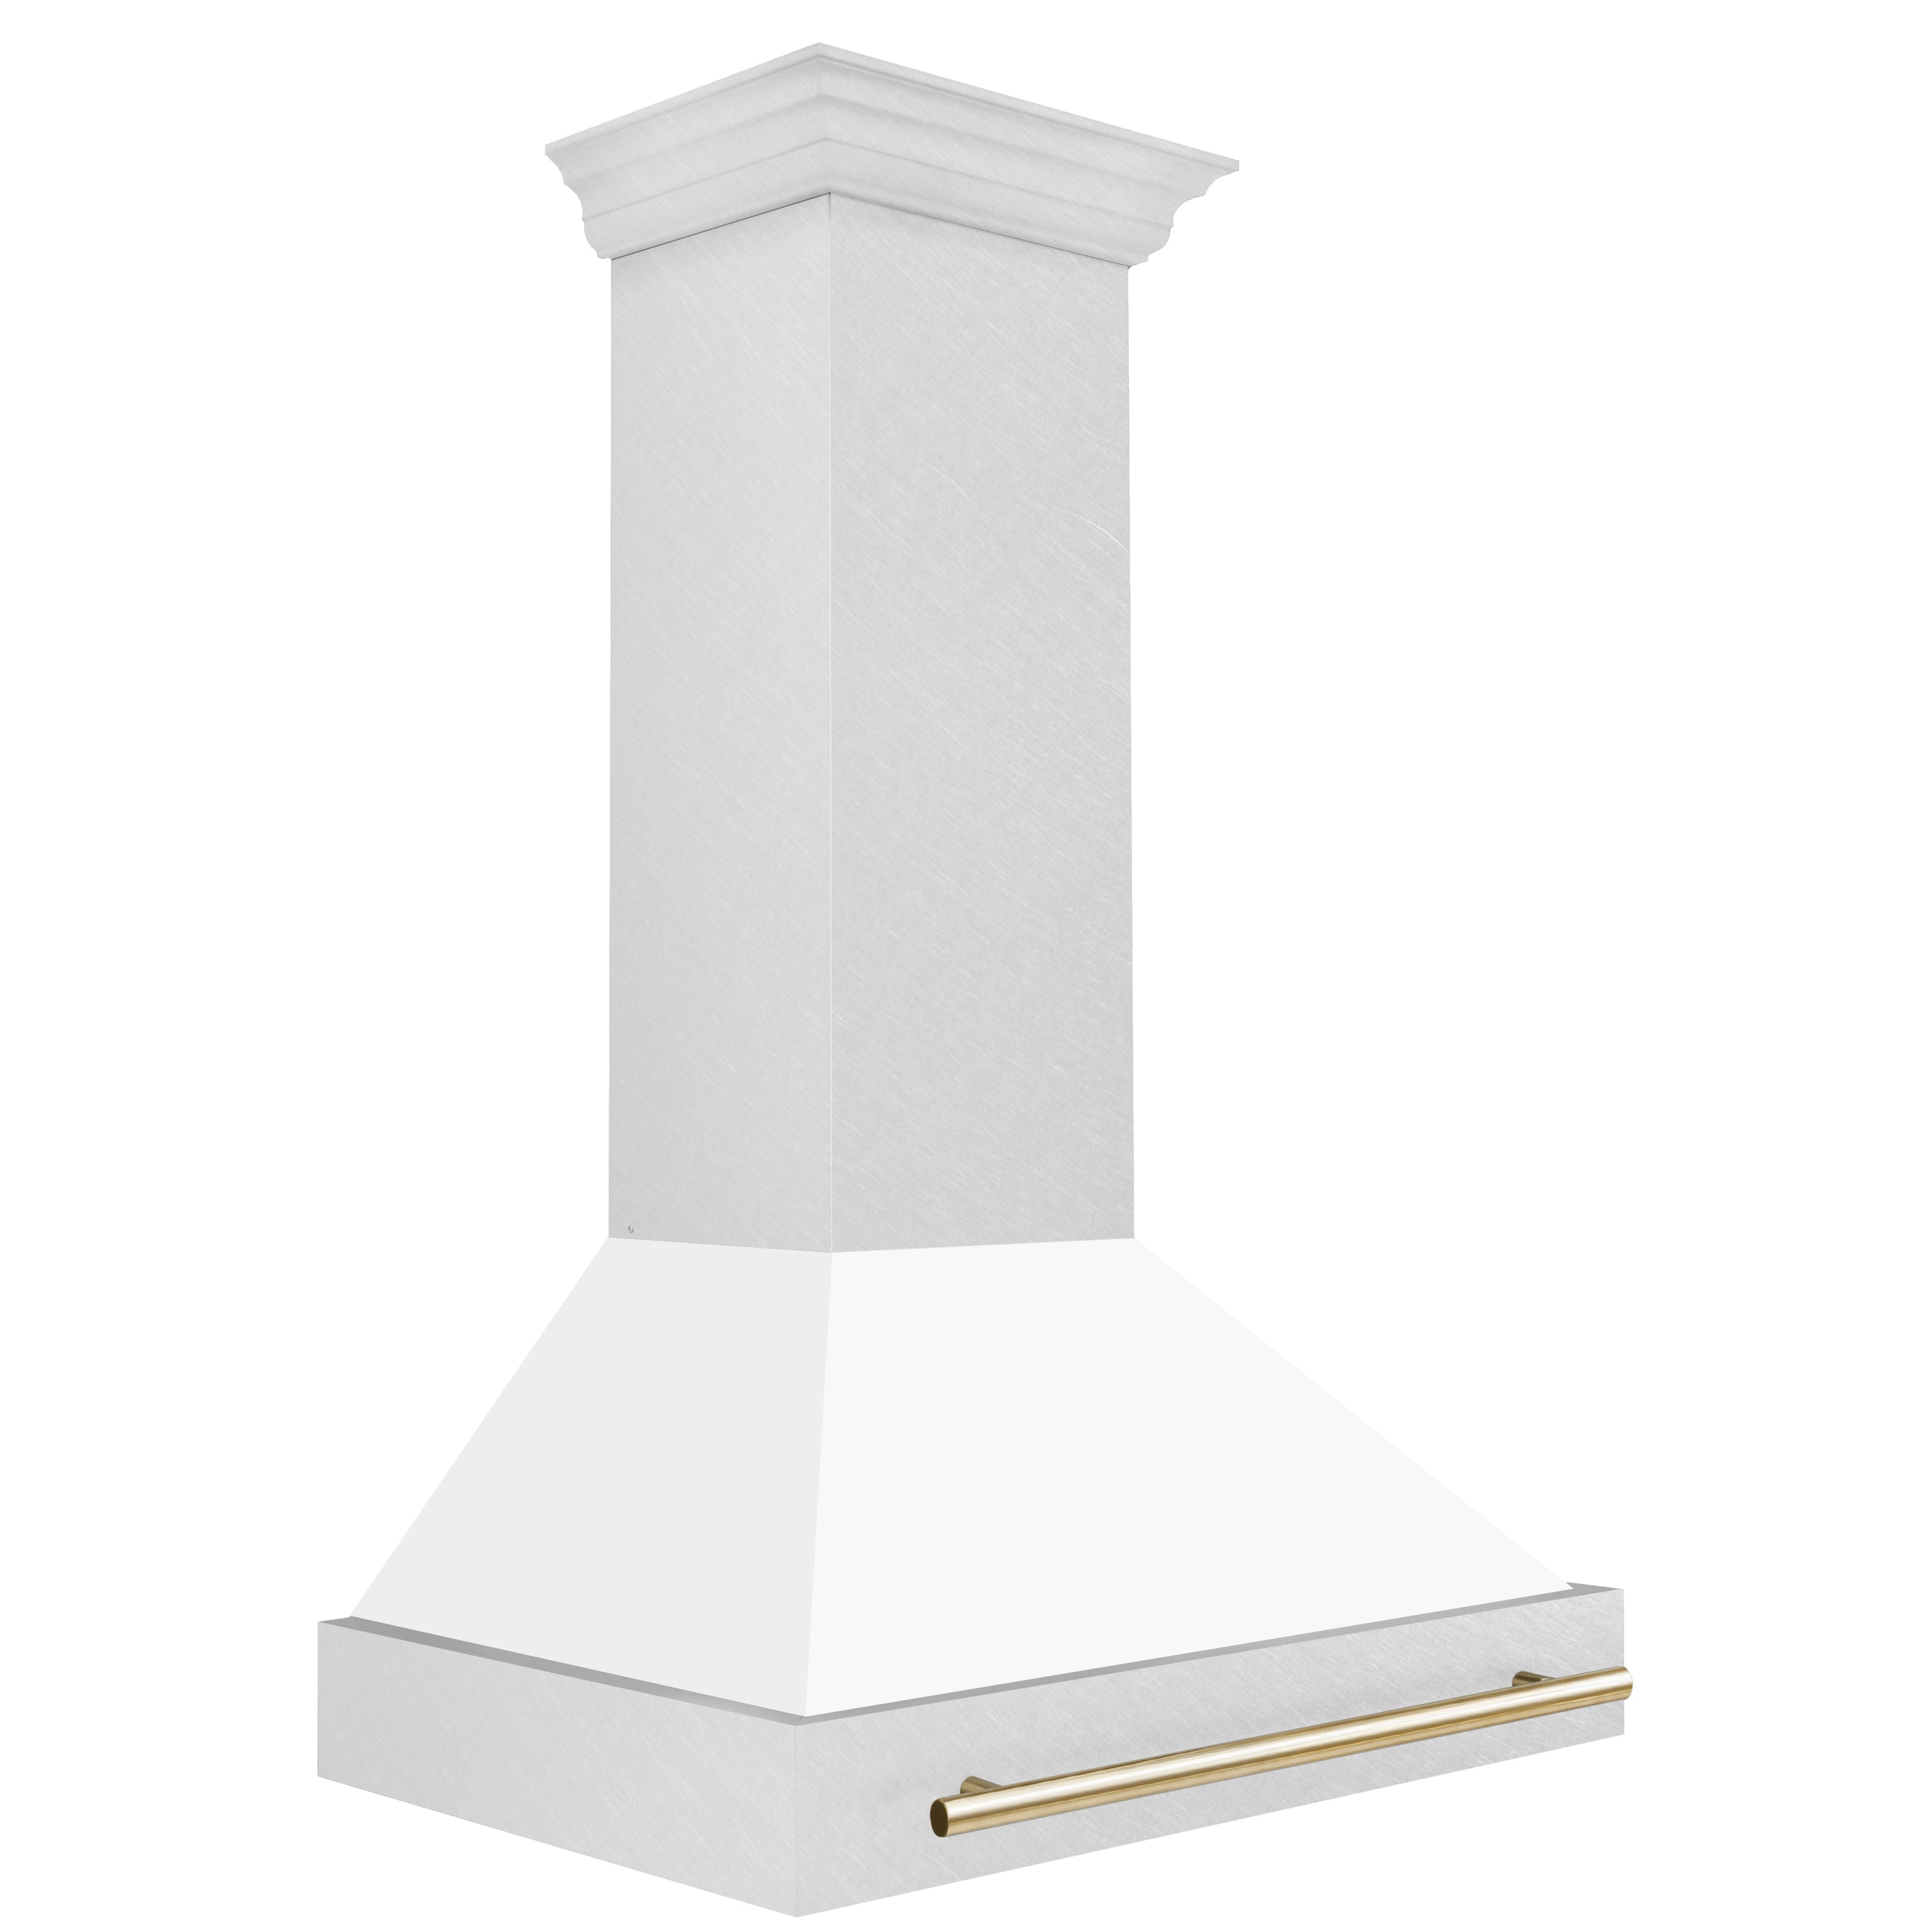 ZLINE 36" Autograph Edition Fingerprint Resistant Stainless Steel Range Hood with White Matte Shell and Gold Handle (8654SNZ-WM36-G)